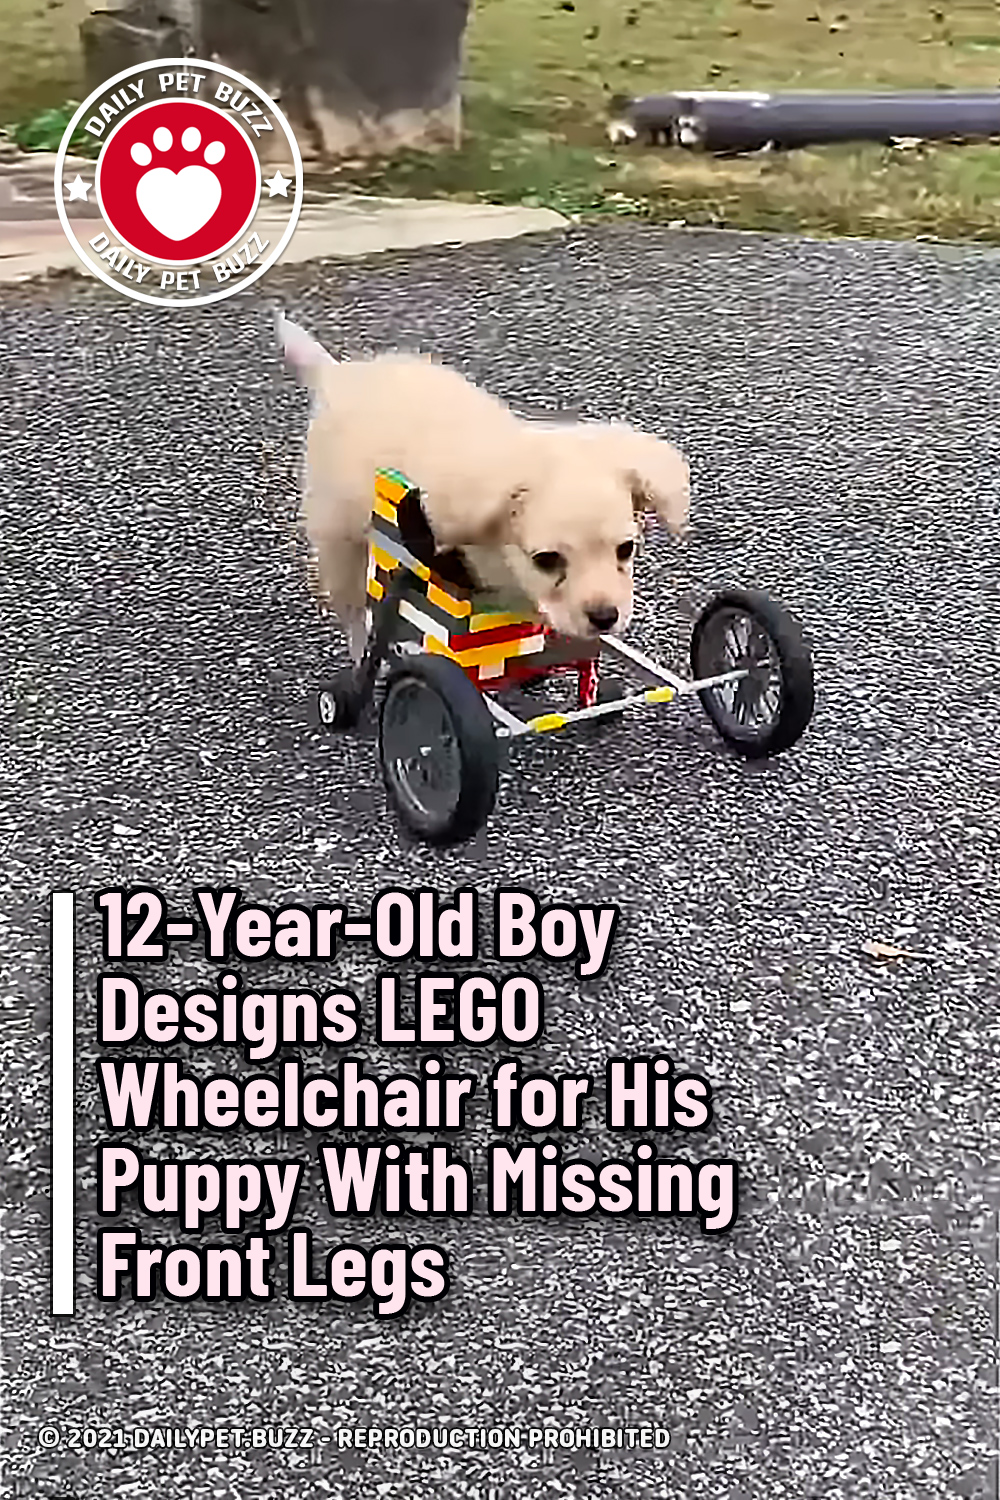 12-Year-Old Boy Designs LEGO Wheelchair for His Puppy With Missing Front Legs